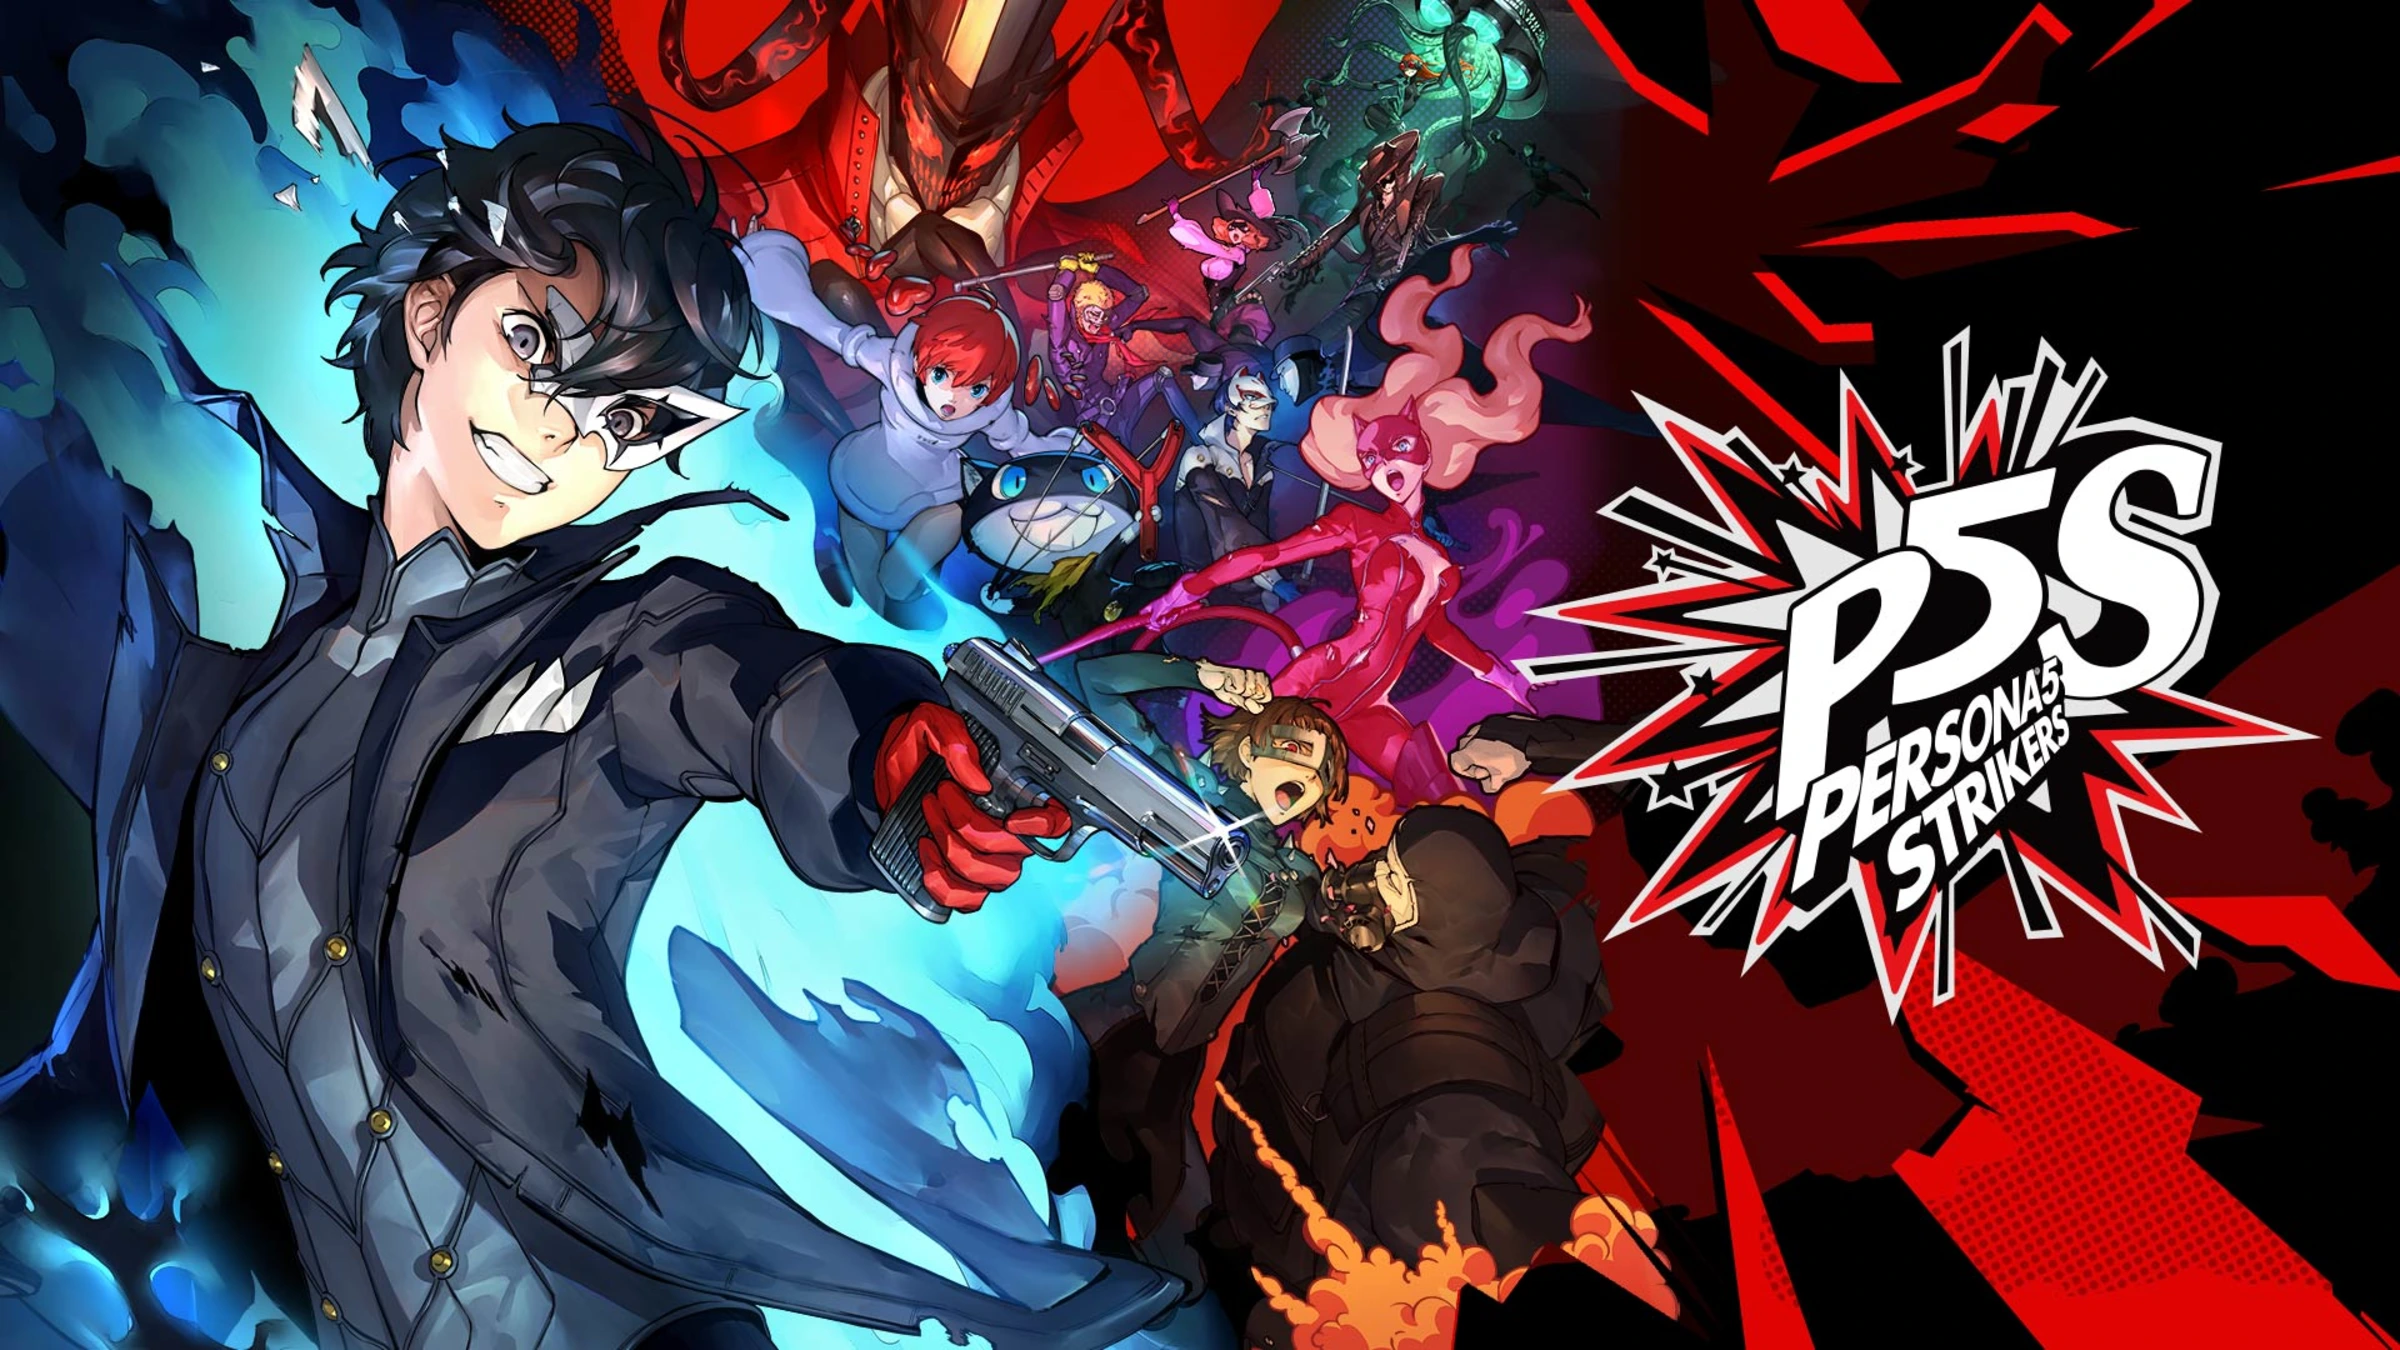 Hands On: Persona 5 Strikers Is a Streamlined Sequel That's